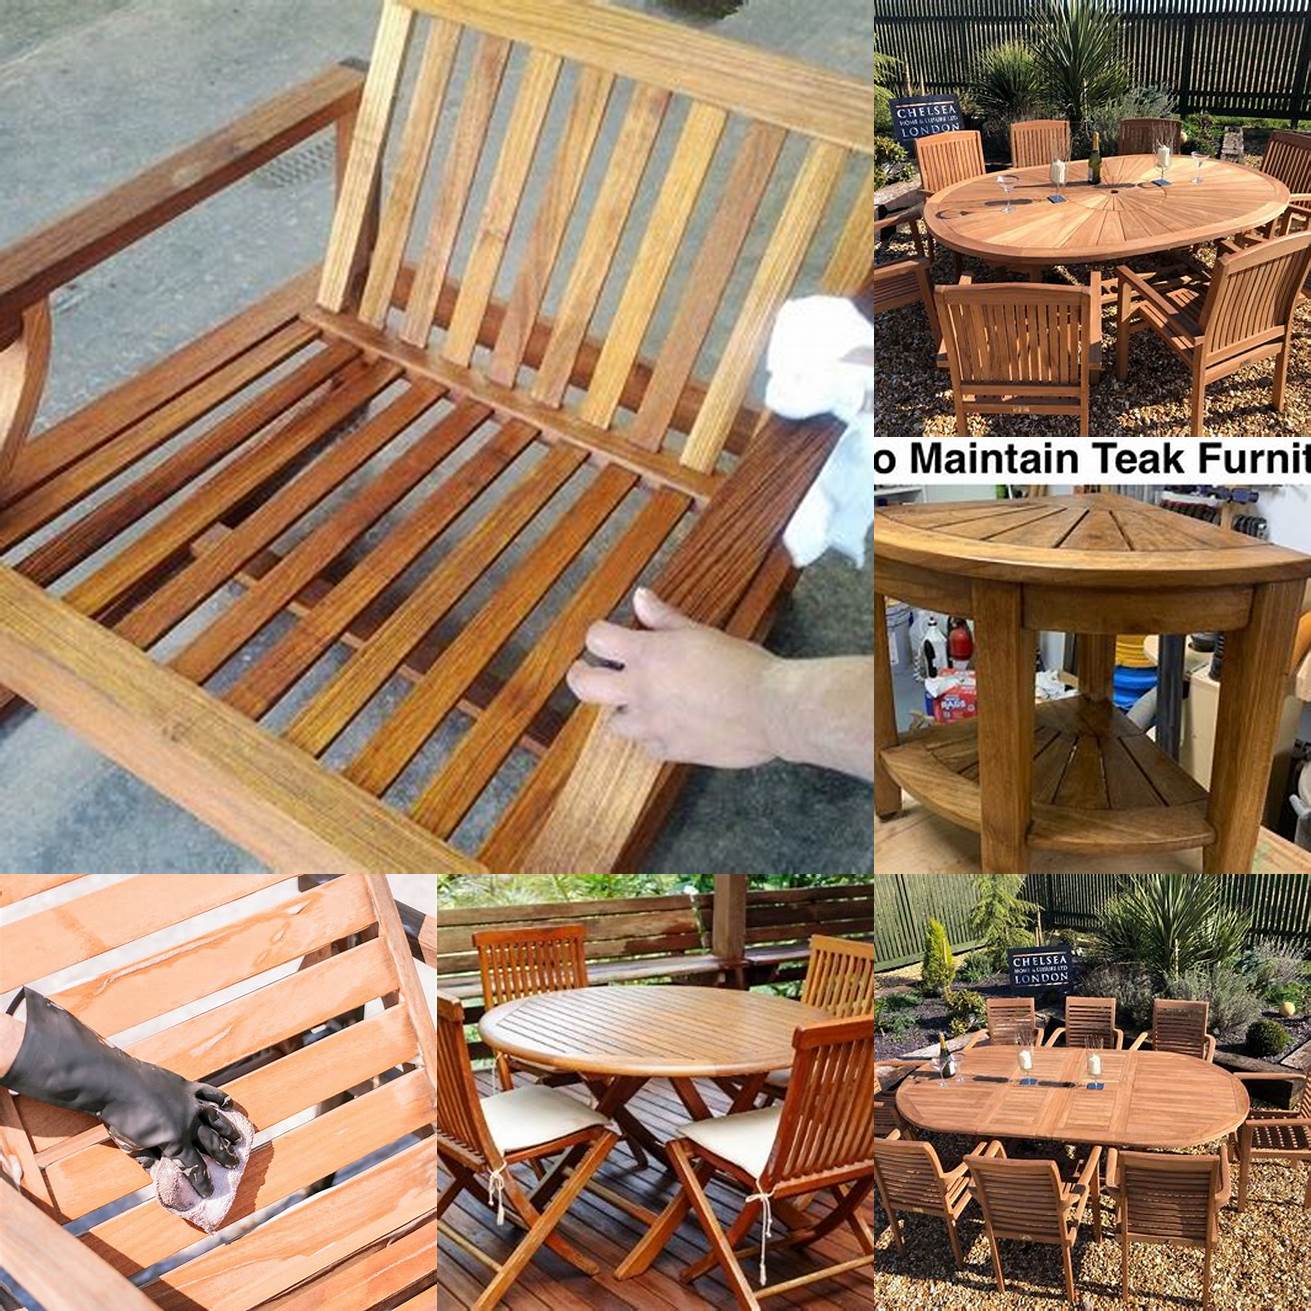 Teak furniture being maintained